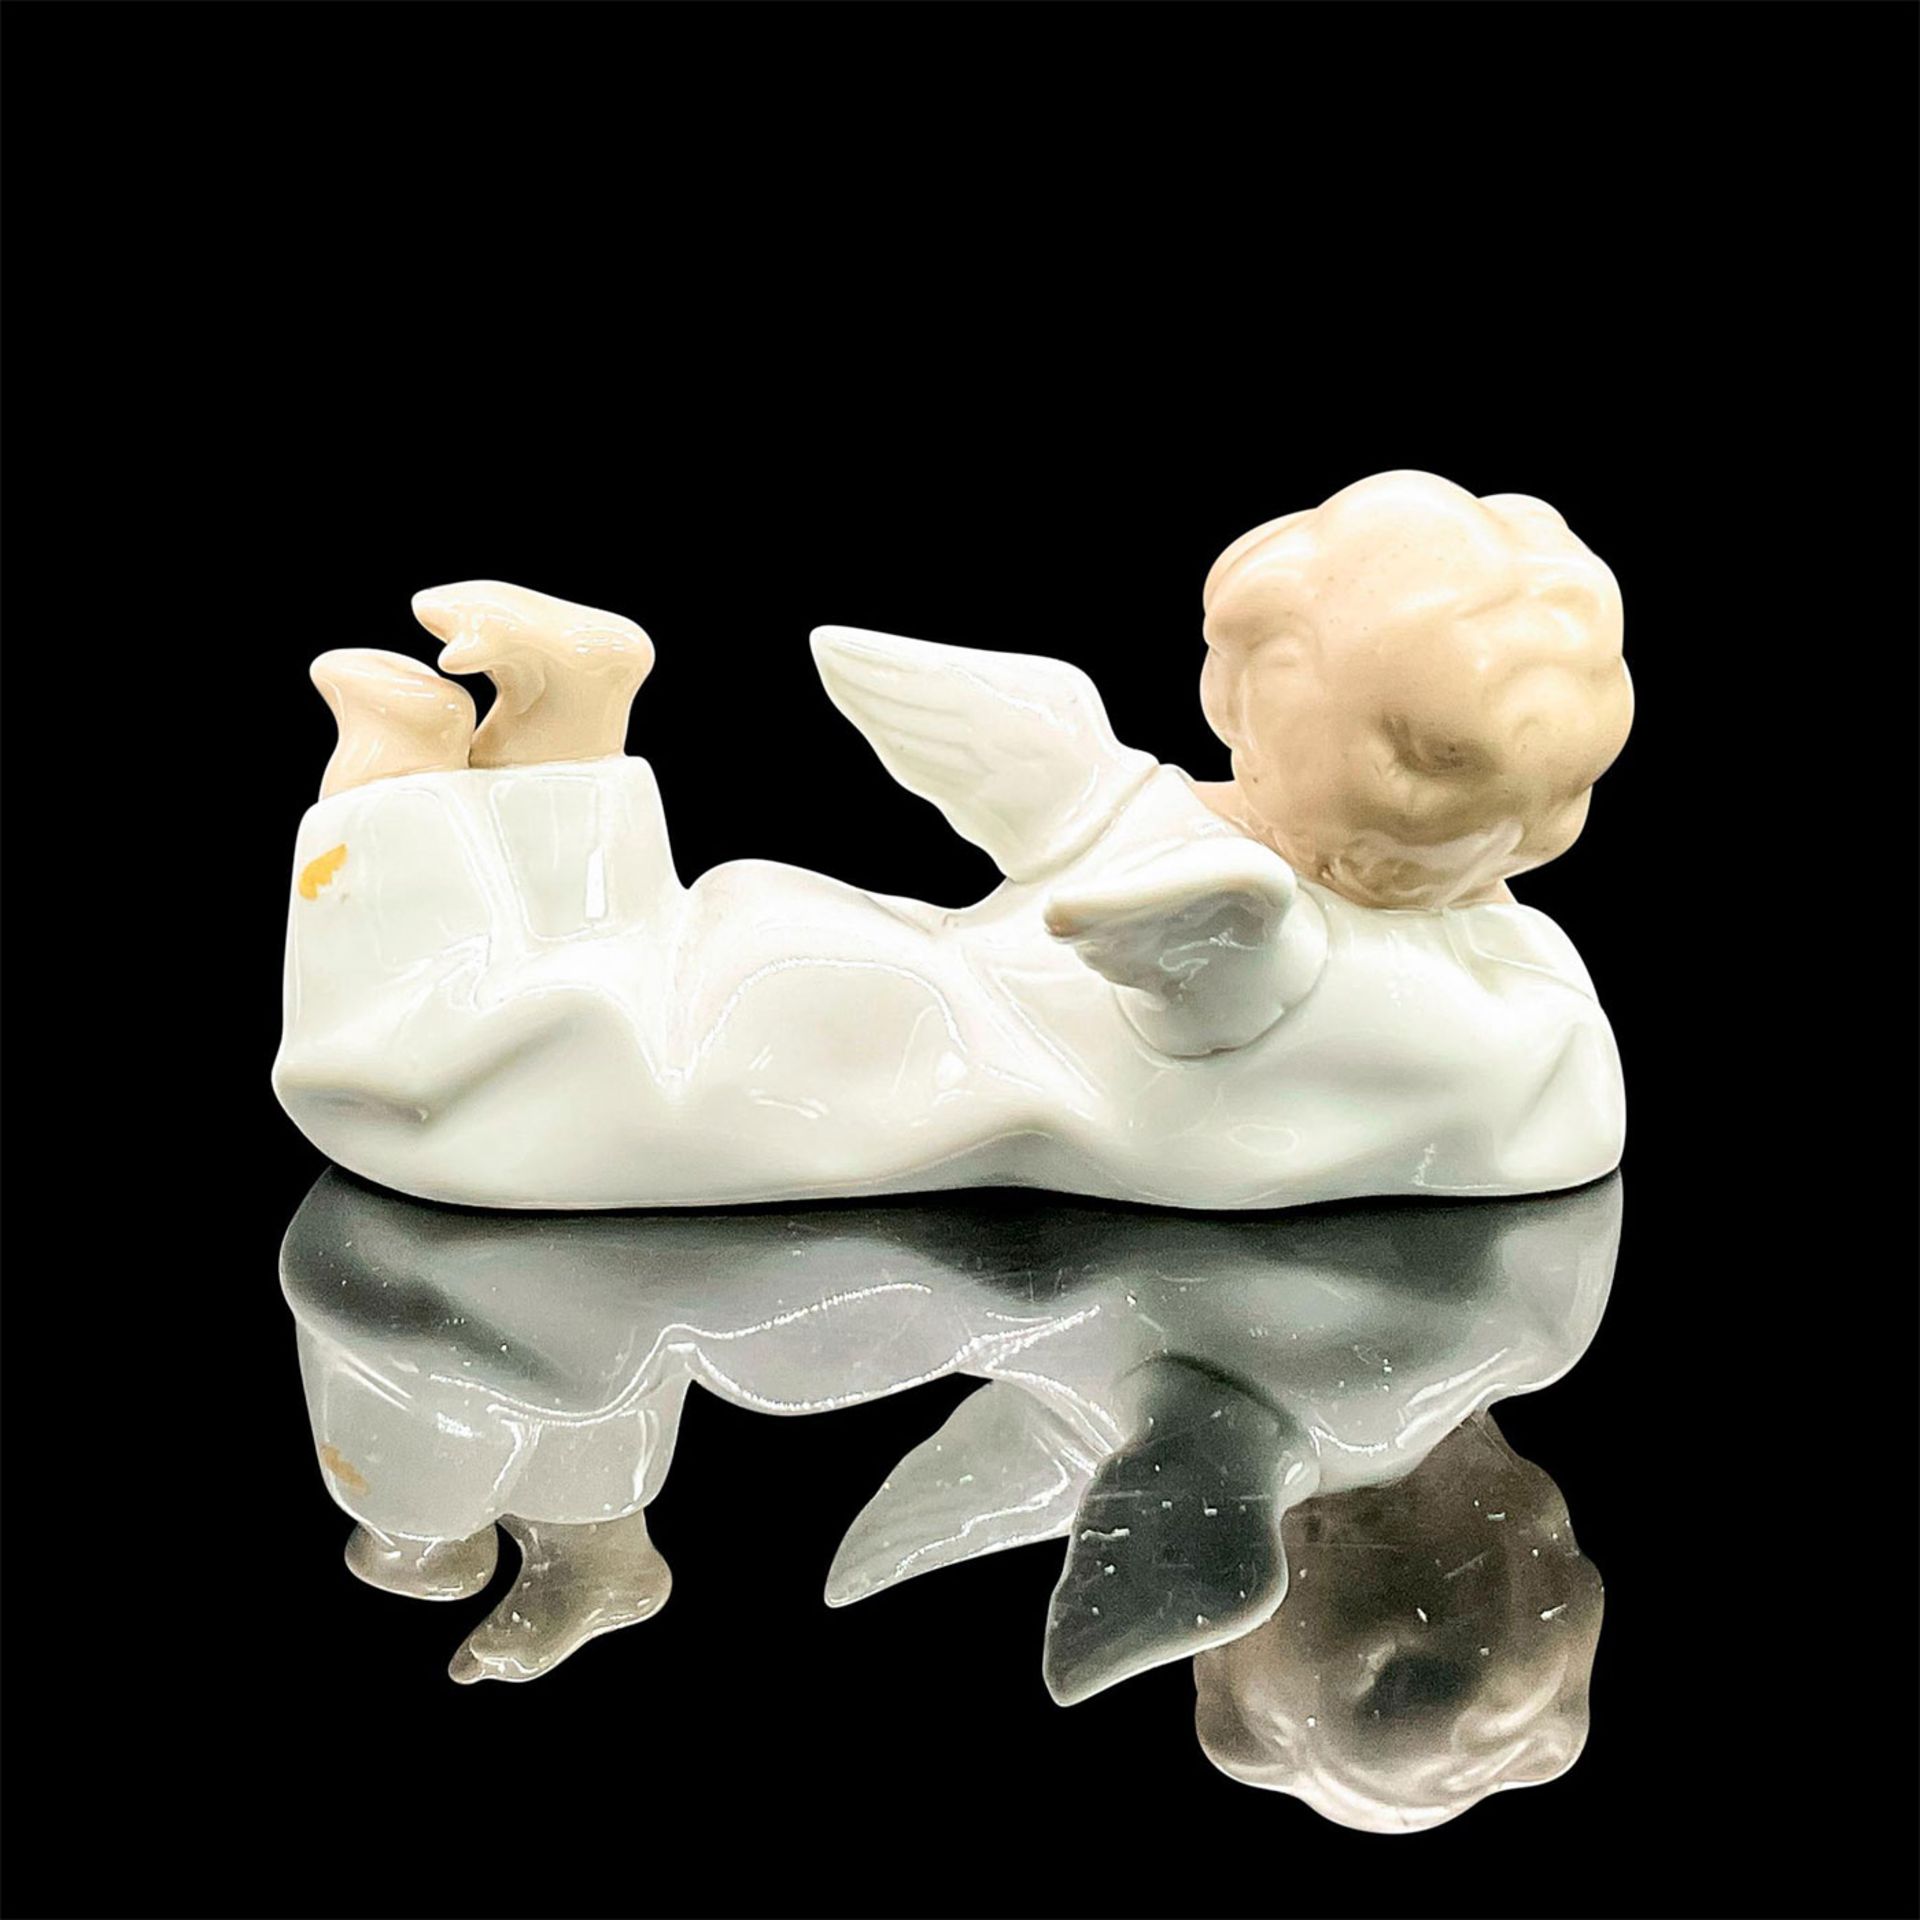 Angel Laying Down 1014541 - Lladro Porcelain Figurine - Image 2 of 3